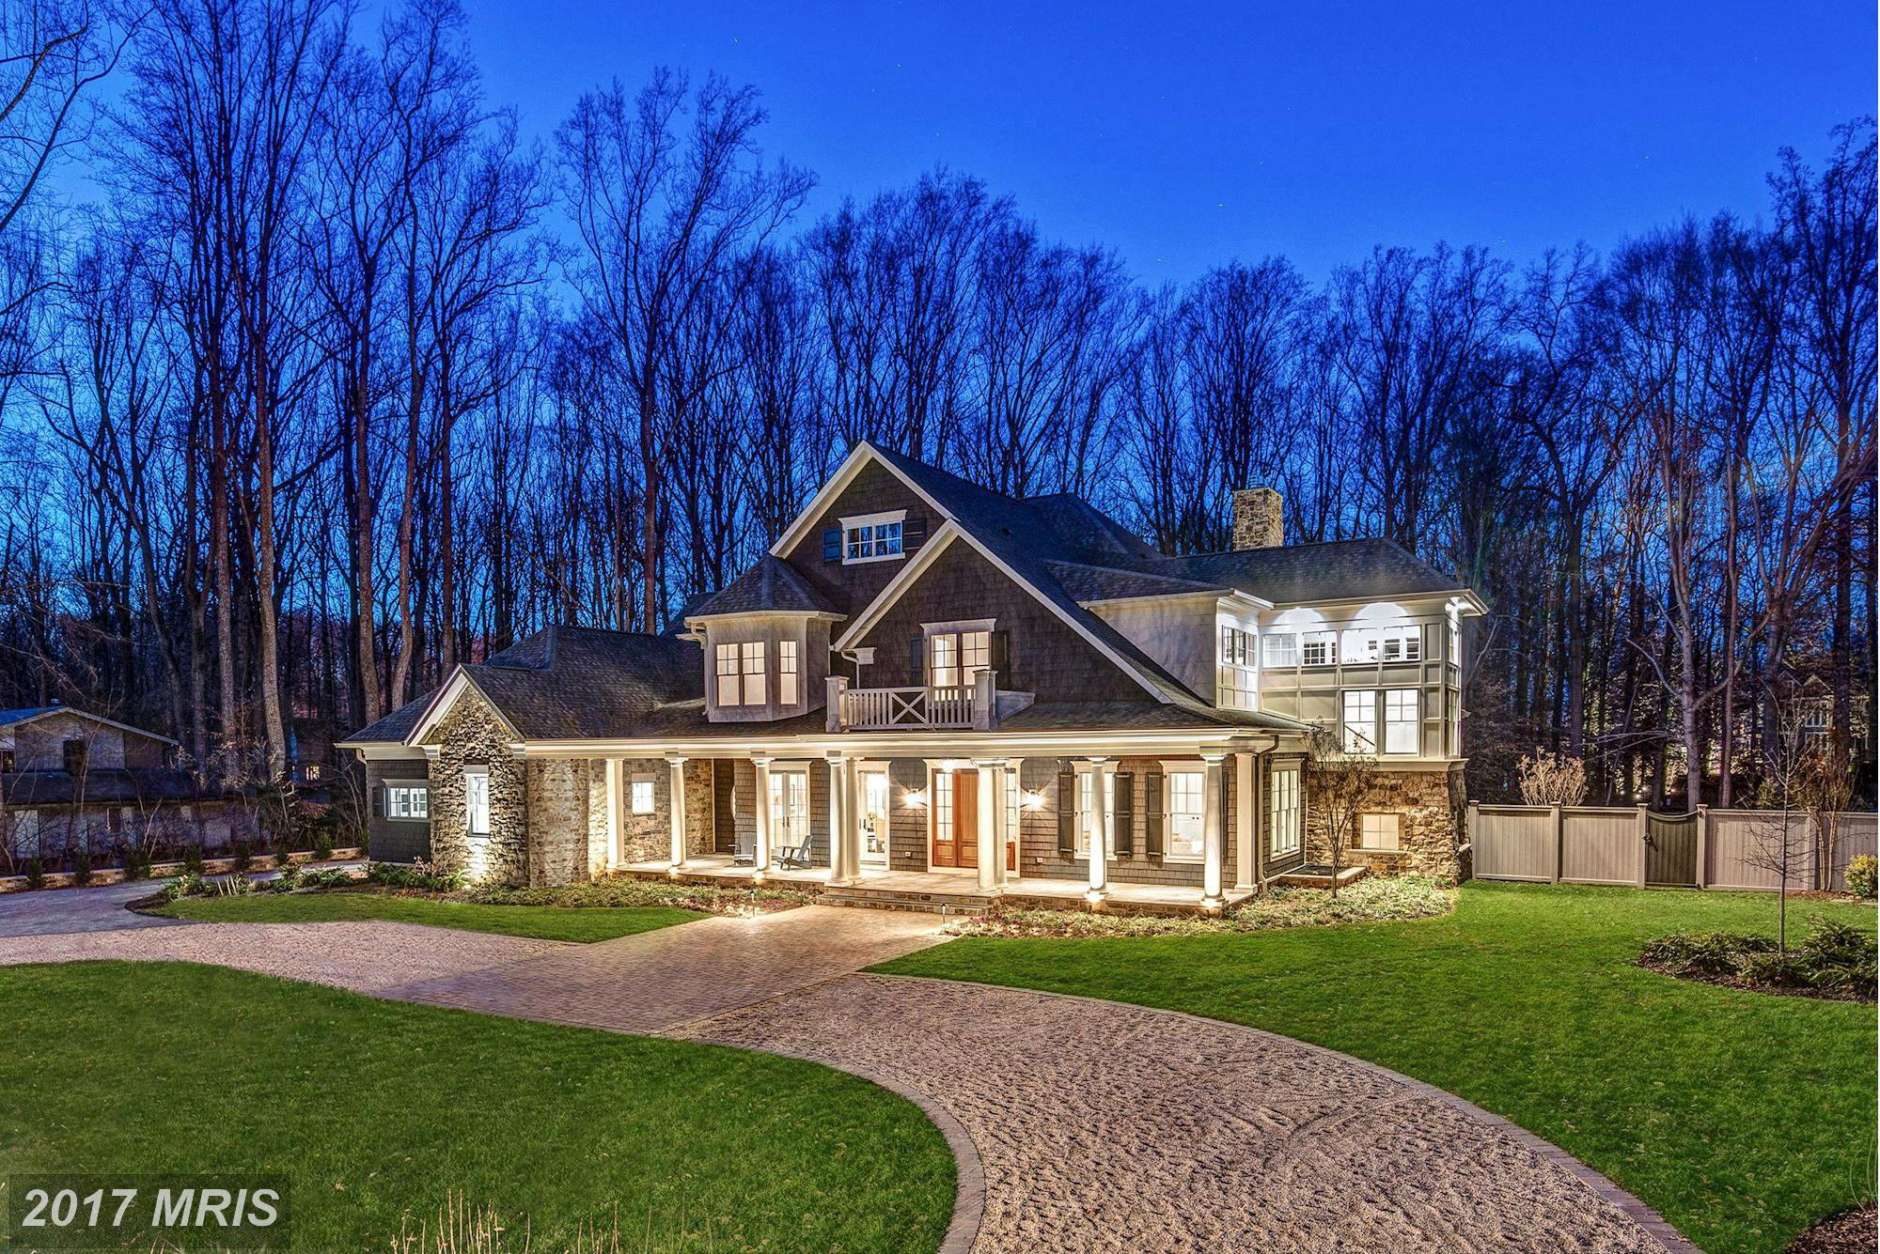 2. $4.5 million 7100 Benjamin St. McLean, Virginia This new build of nearly 10,000 square feet sits on a 1-acre flat lot and has six bedrooms, seven bathrooms and two half-baths. Features include a master bedroom with a private porch, a main-level bedroom suite and a library with 12-foot ceiling. (Photo courtesy MRIS, a Bright MLS)